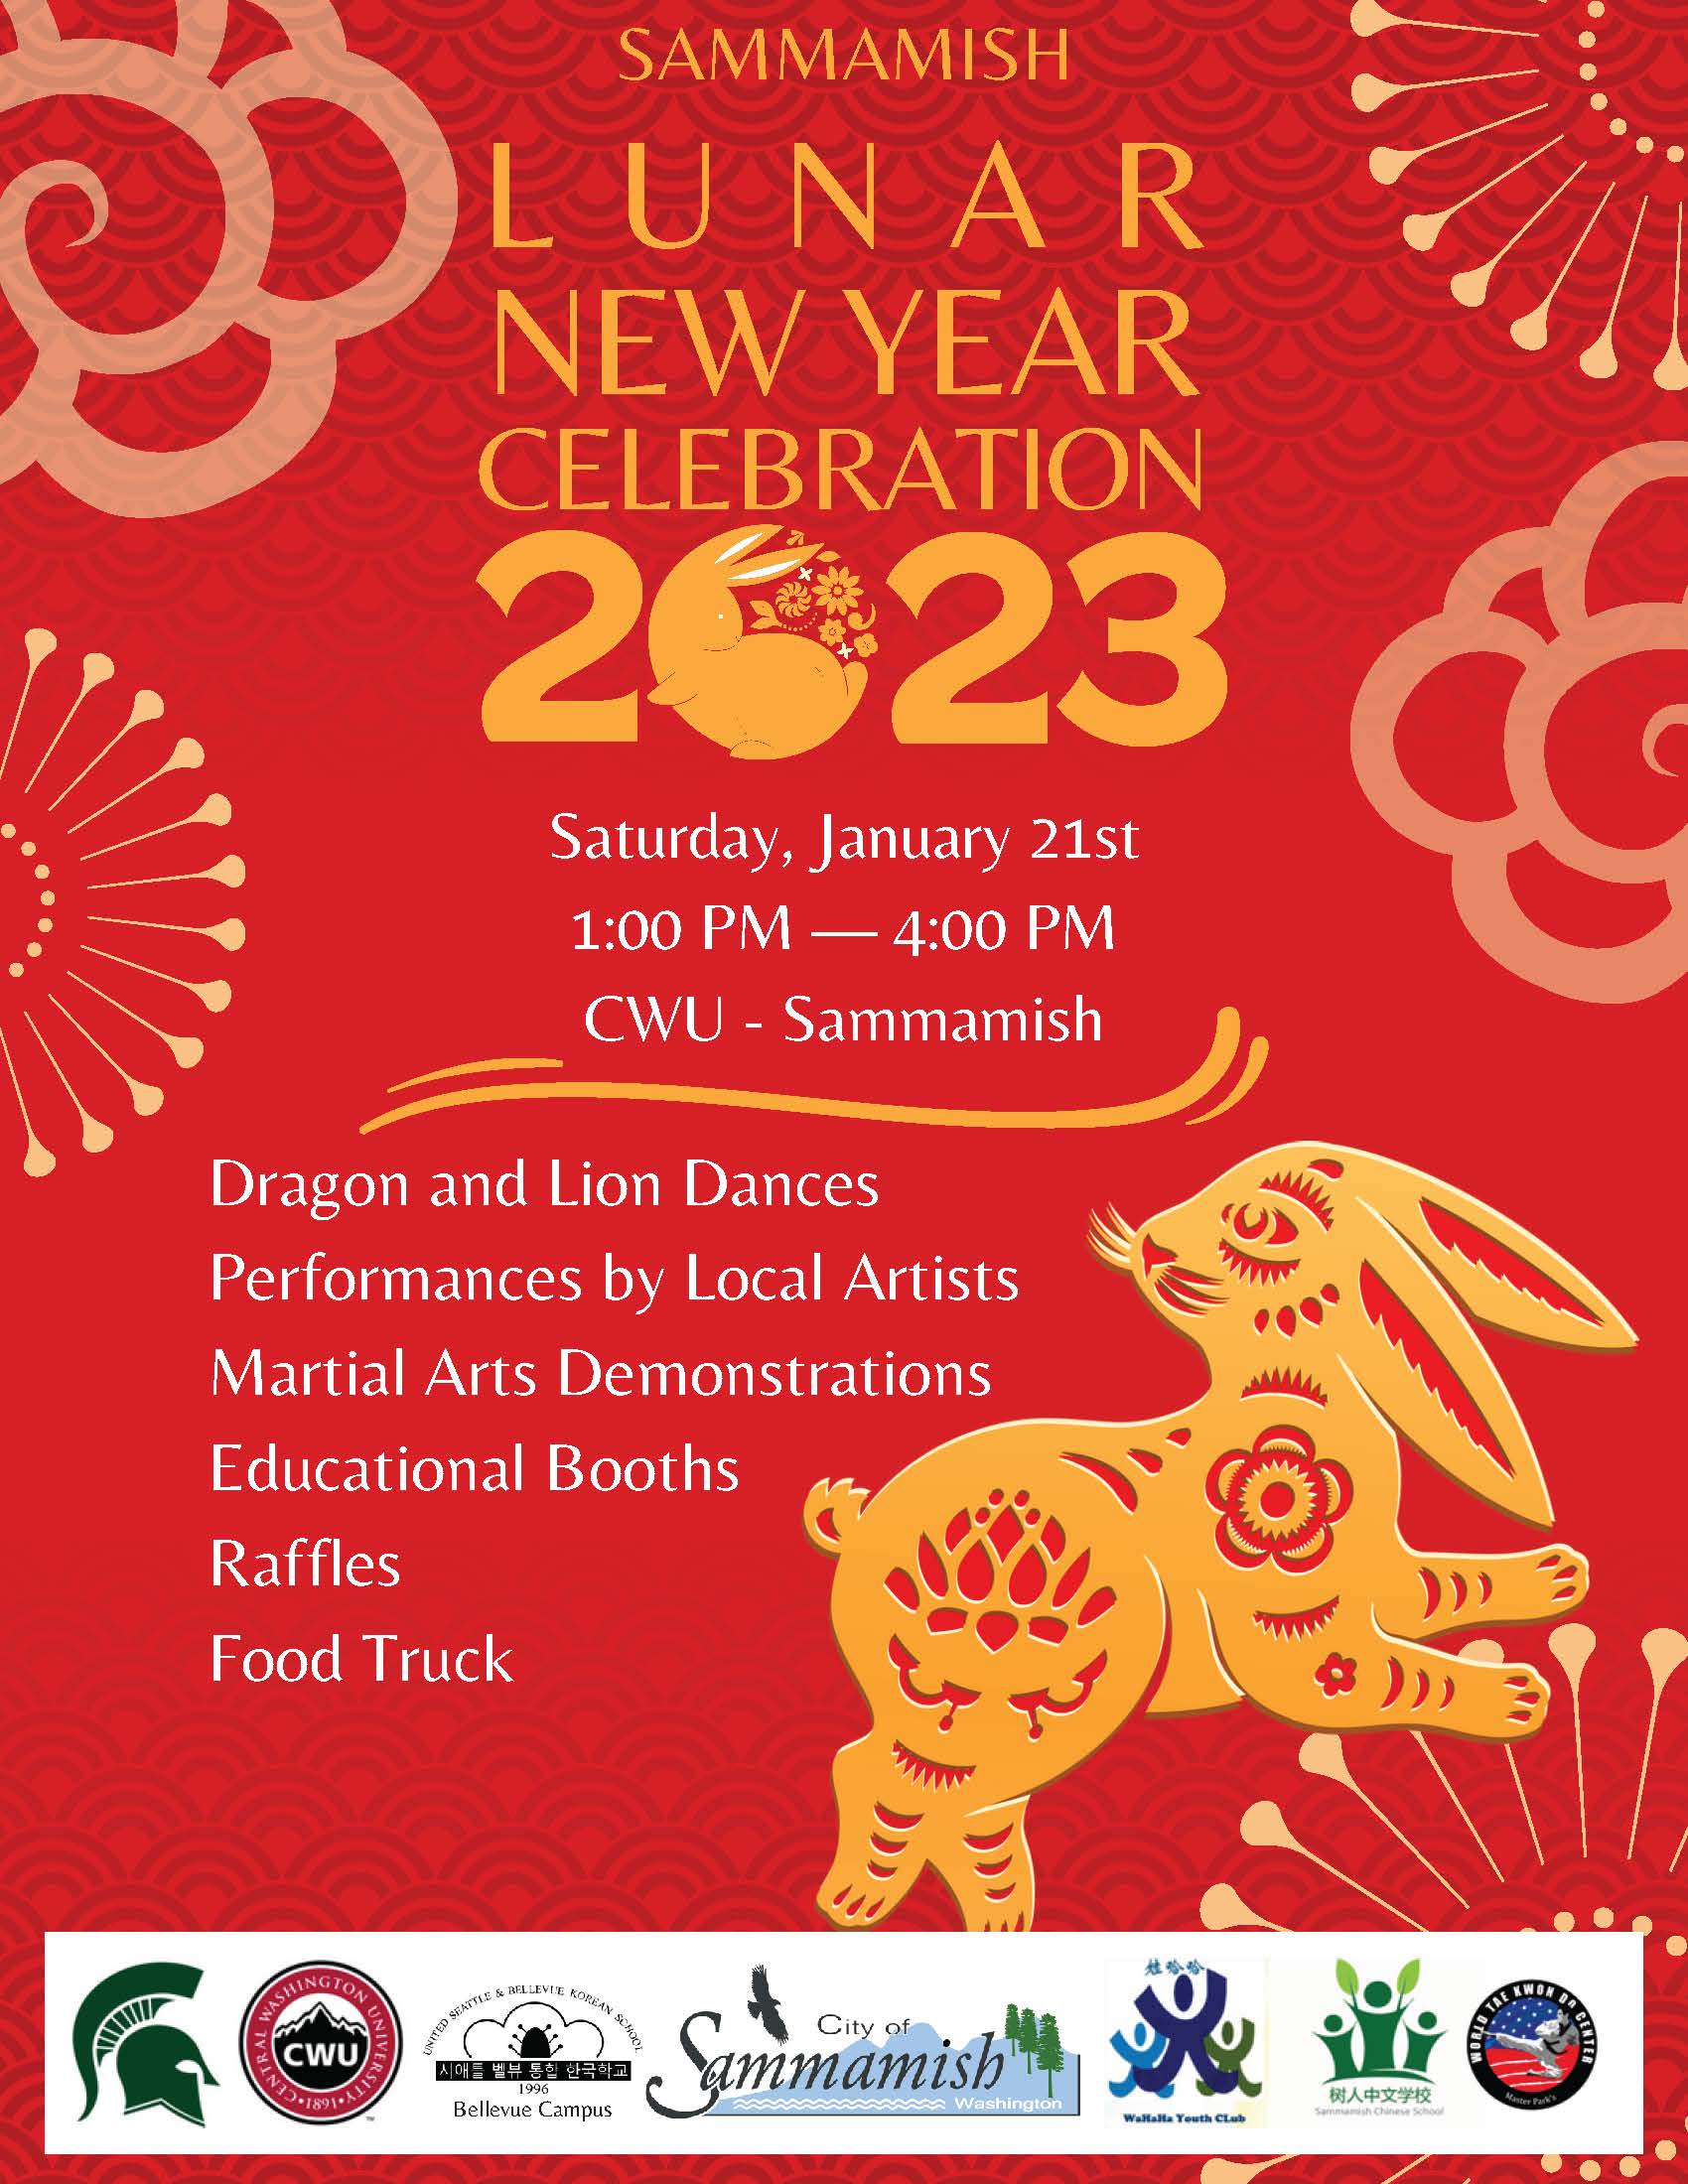 Lunar New Year Flyer with rabbit on it. New Year Celebration 2023, Saturday, January 21st. 1:00 PM - 4:00 PM. CWU - Sammamish. Dragon and lion dances, performances by local artists, martial arts demonstrations, educational booths, raffles, food truck.